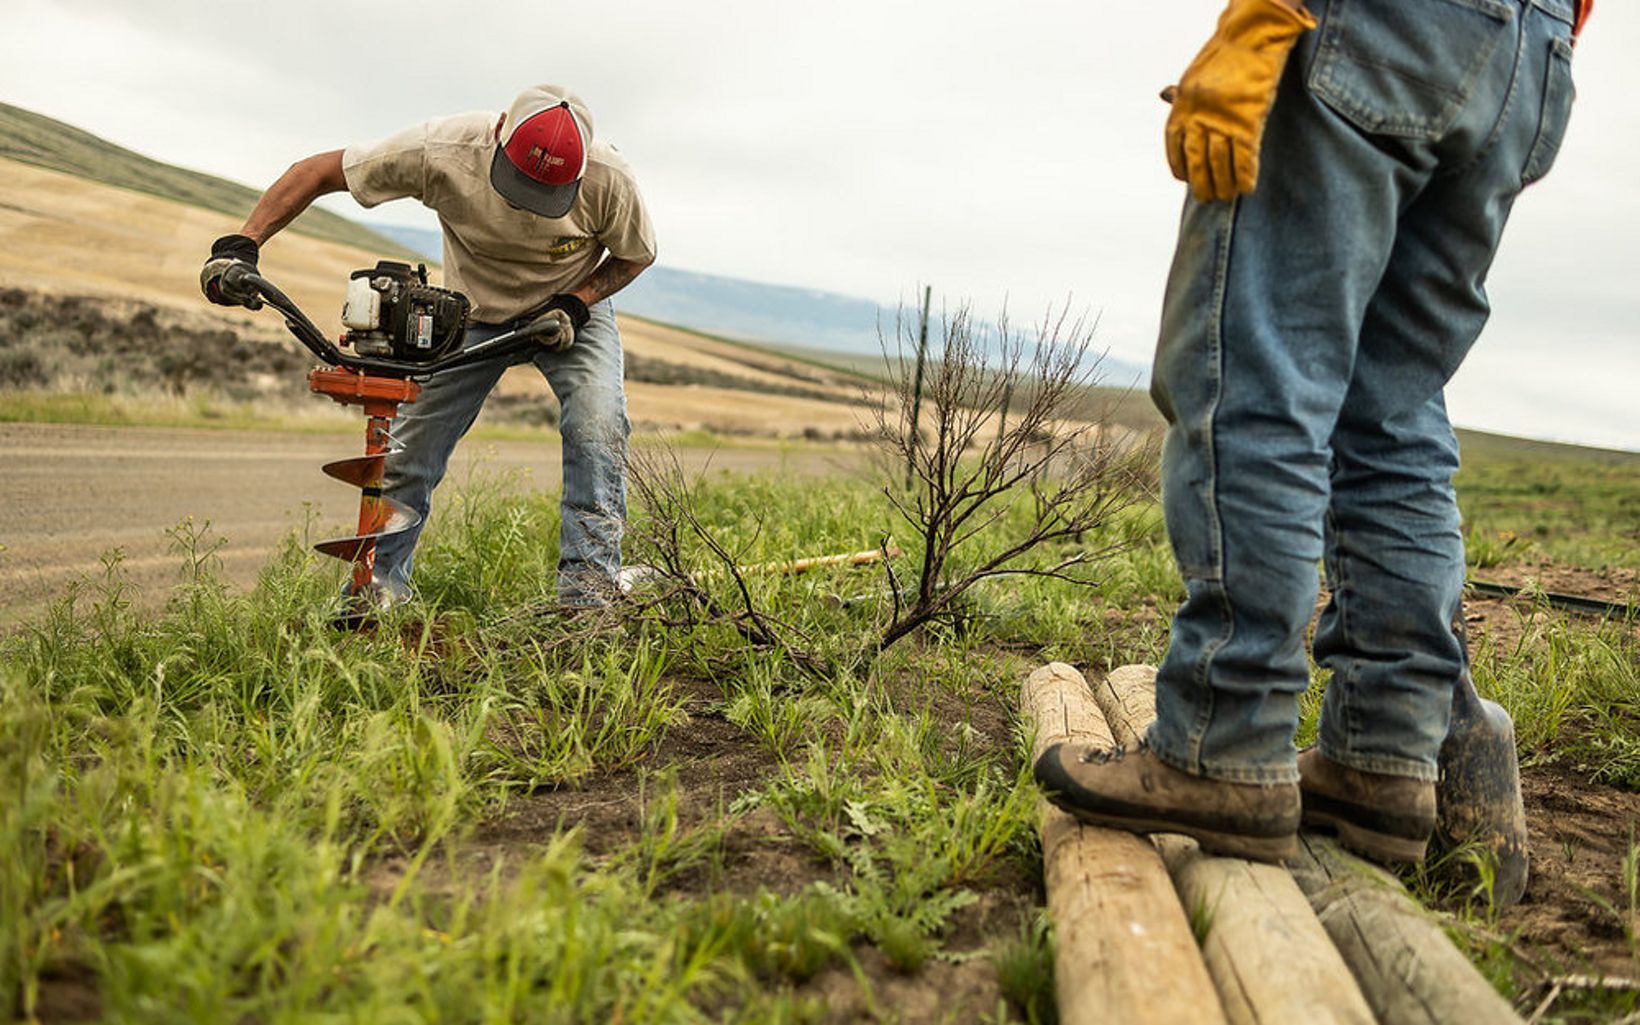 A man drills a hole for a fence post at TNC's Beezley Hills Preserve in Washington state.